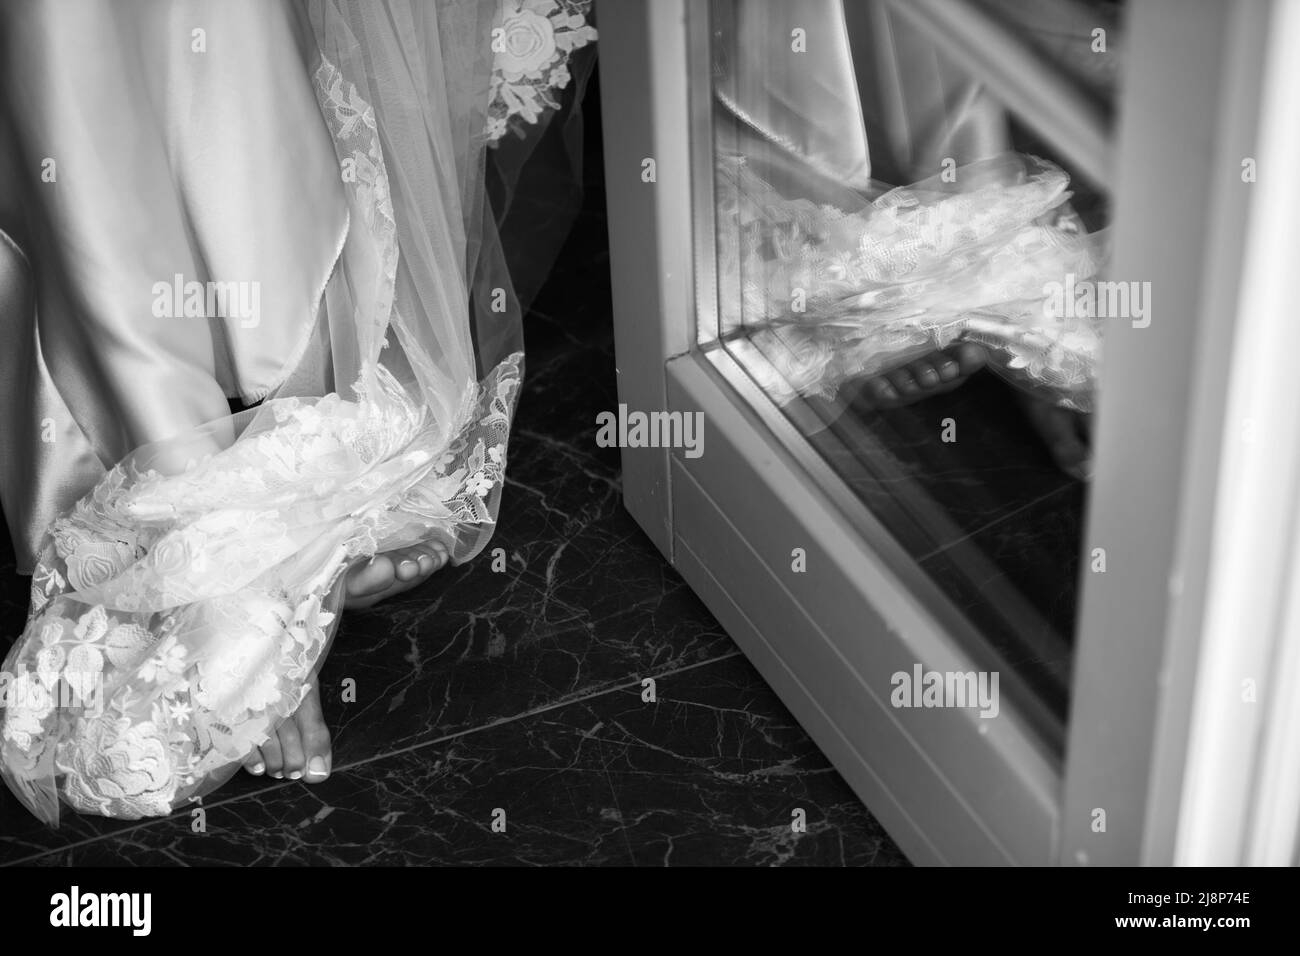 Legs of the bride with a veil near the mirror. Stock Photo